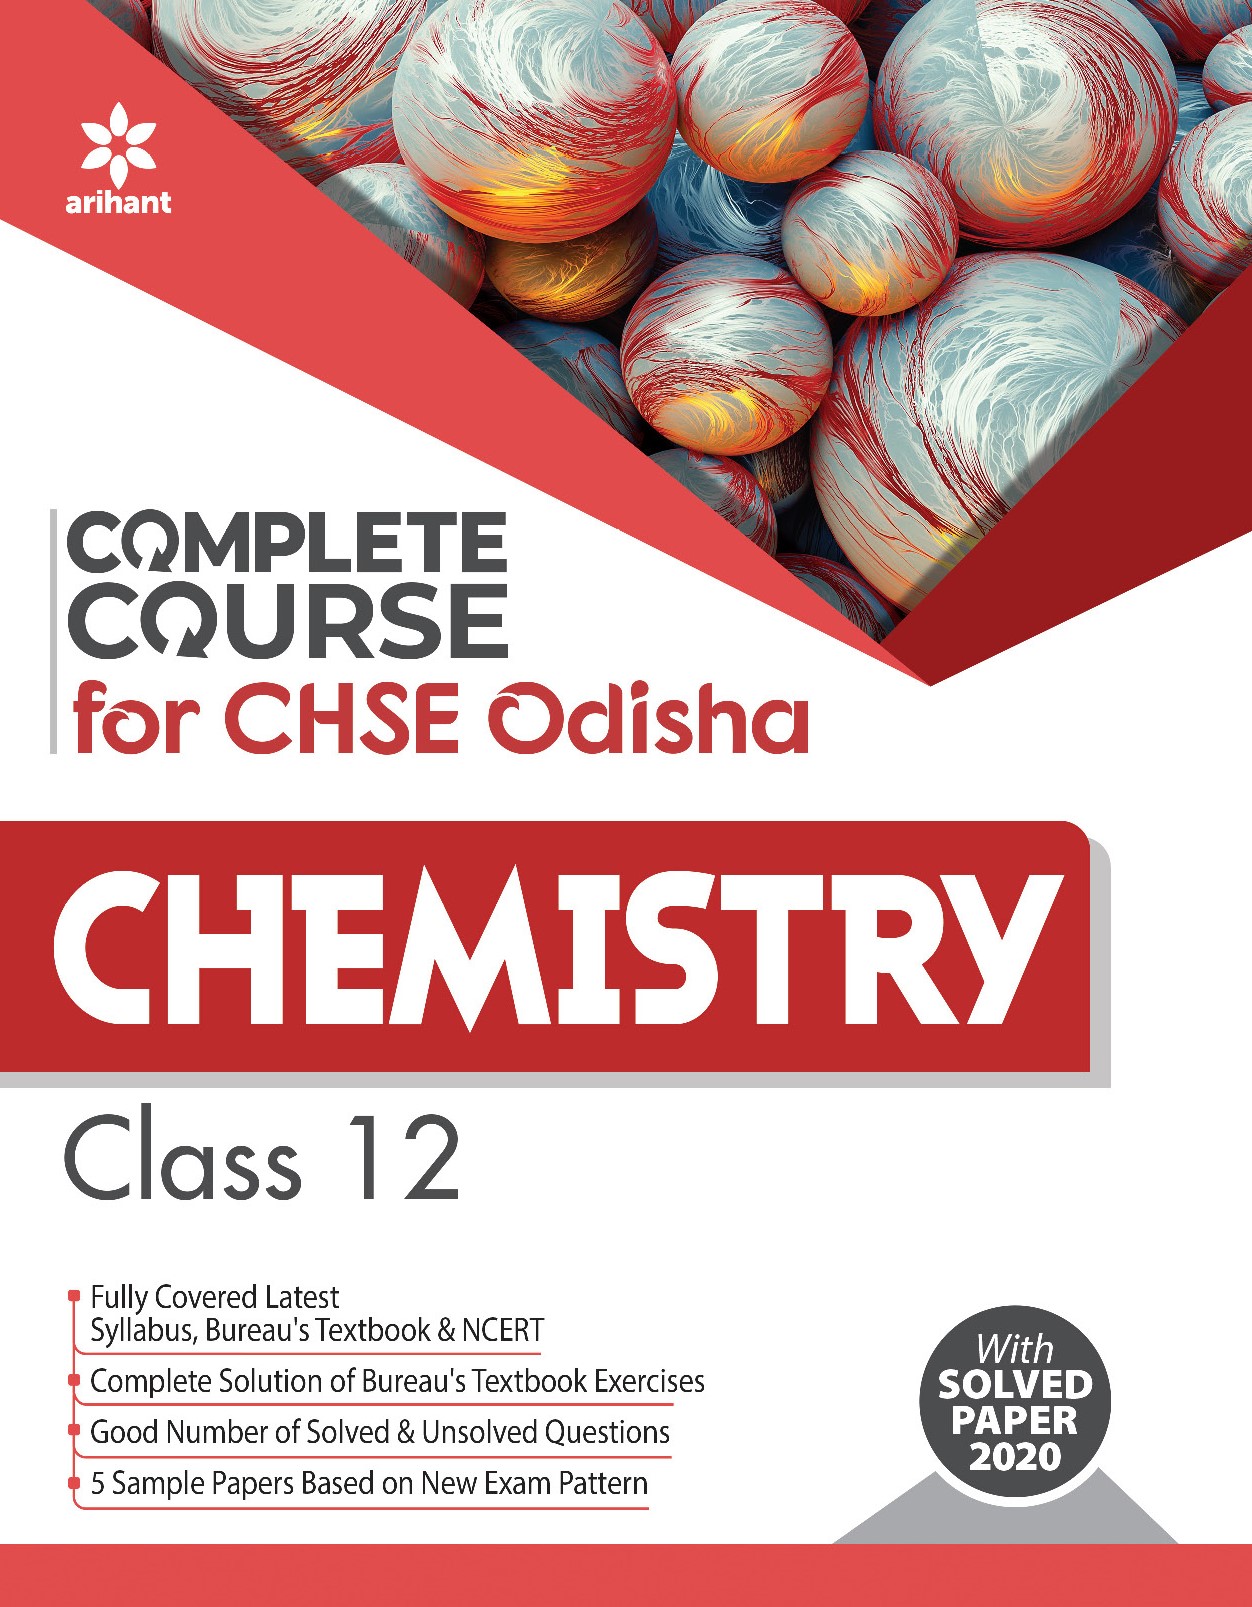 Complete Course For CHSE Odisha Chemistry Class 12 for 2021 Exam